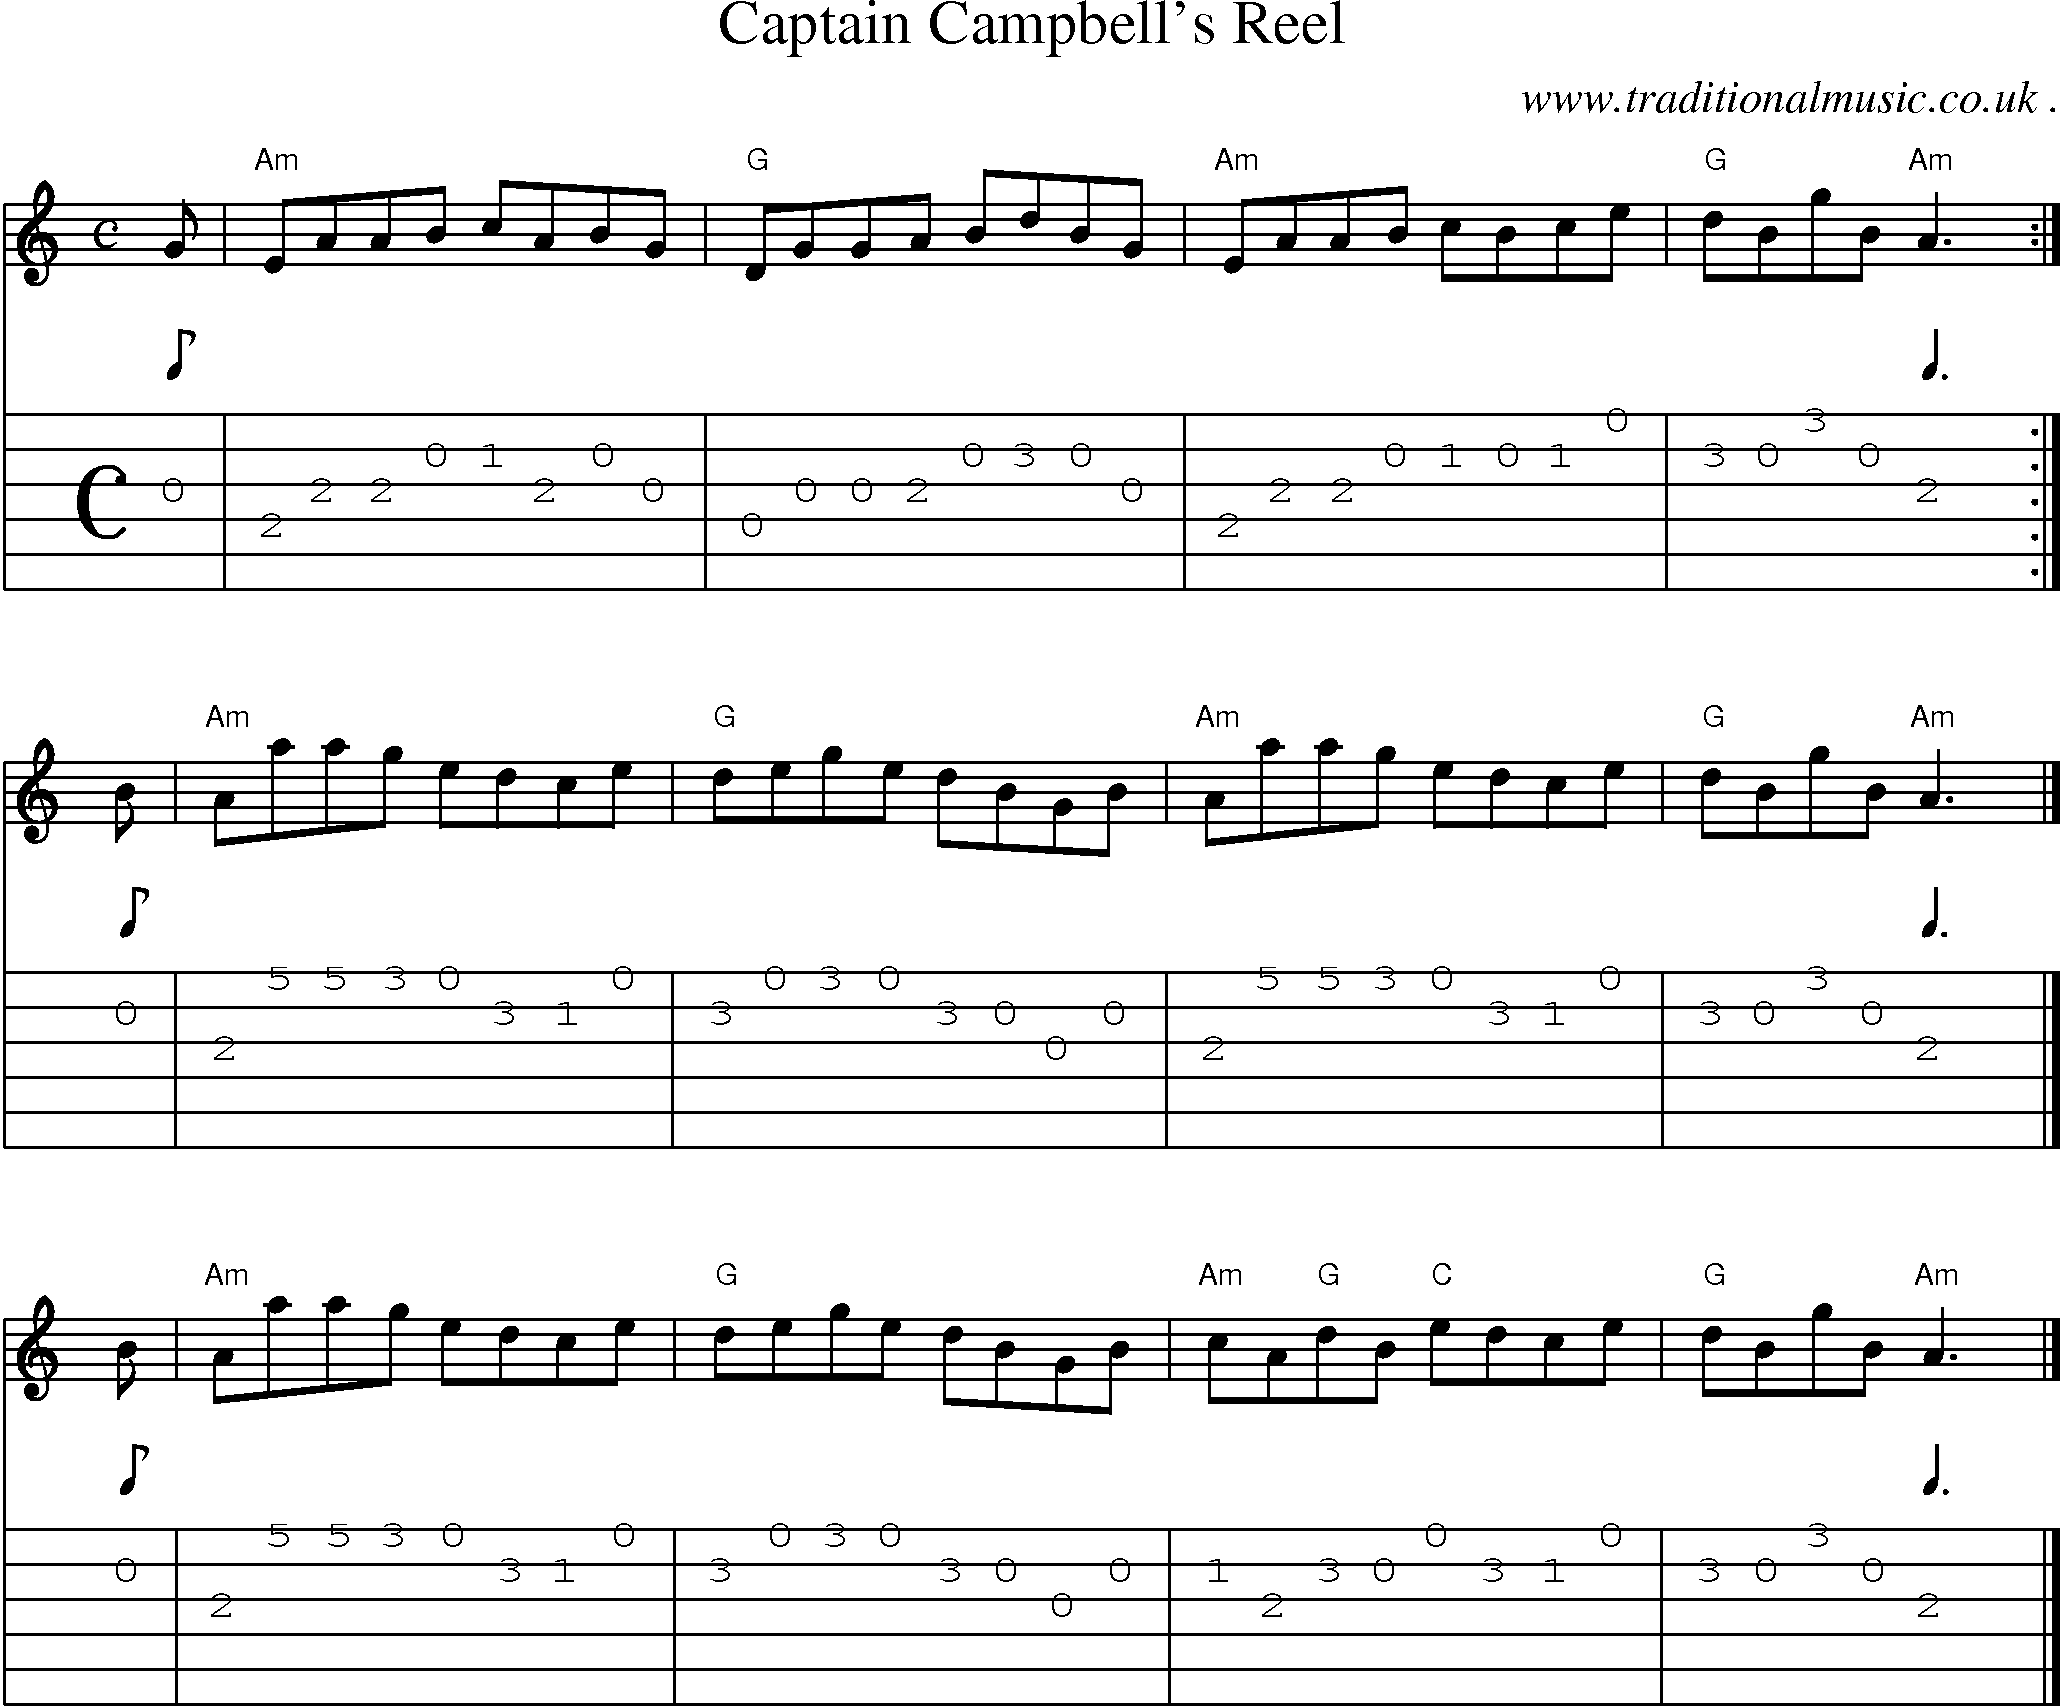 Sheet-music  score, Chords and Guitar Tabs for Captain Campbells Reel